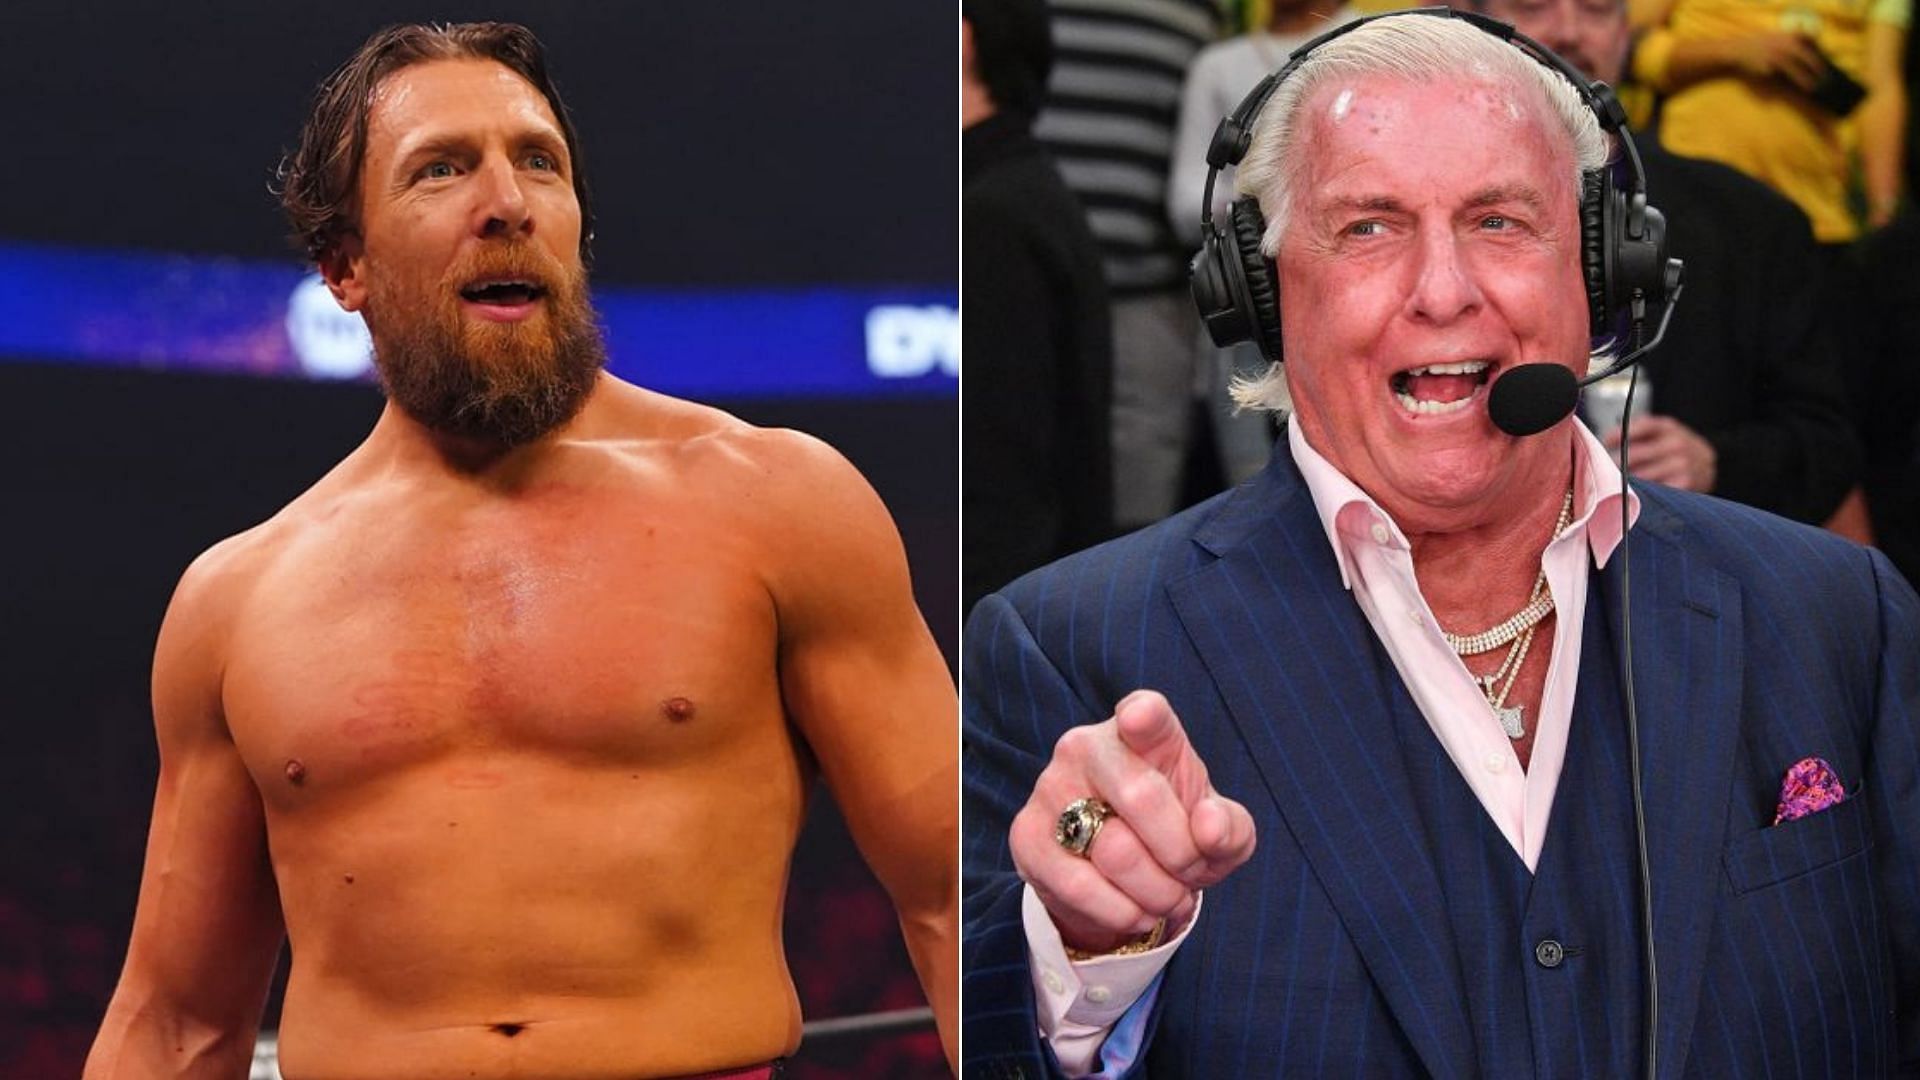 Ric Flair thinks Bryan Danielson is a good wrestler but not as good as this top WWE star